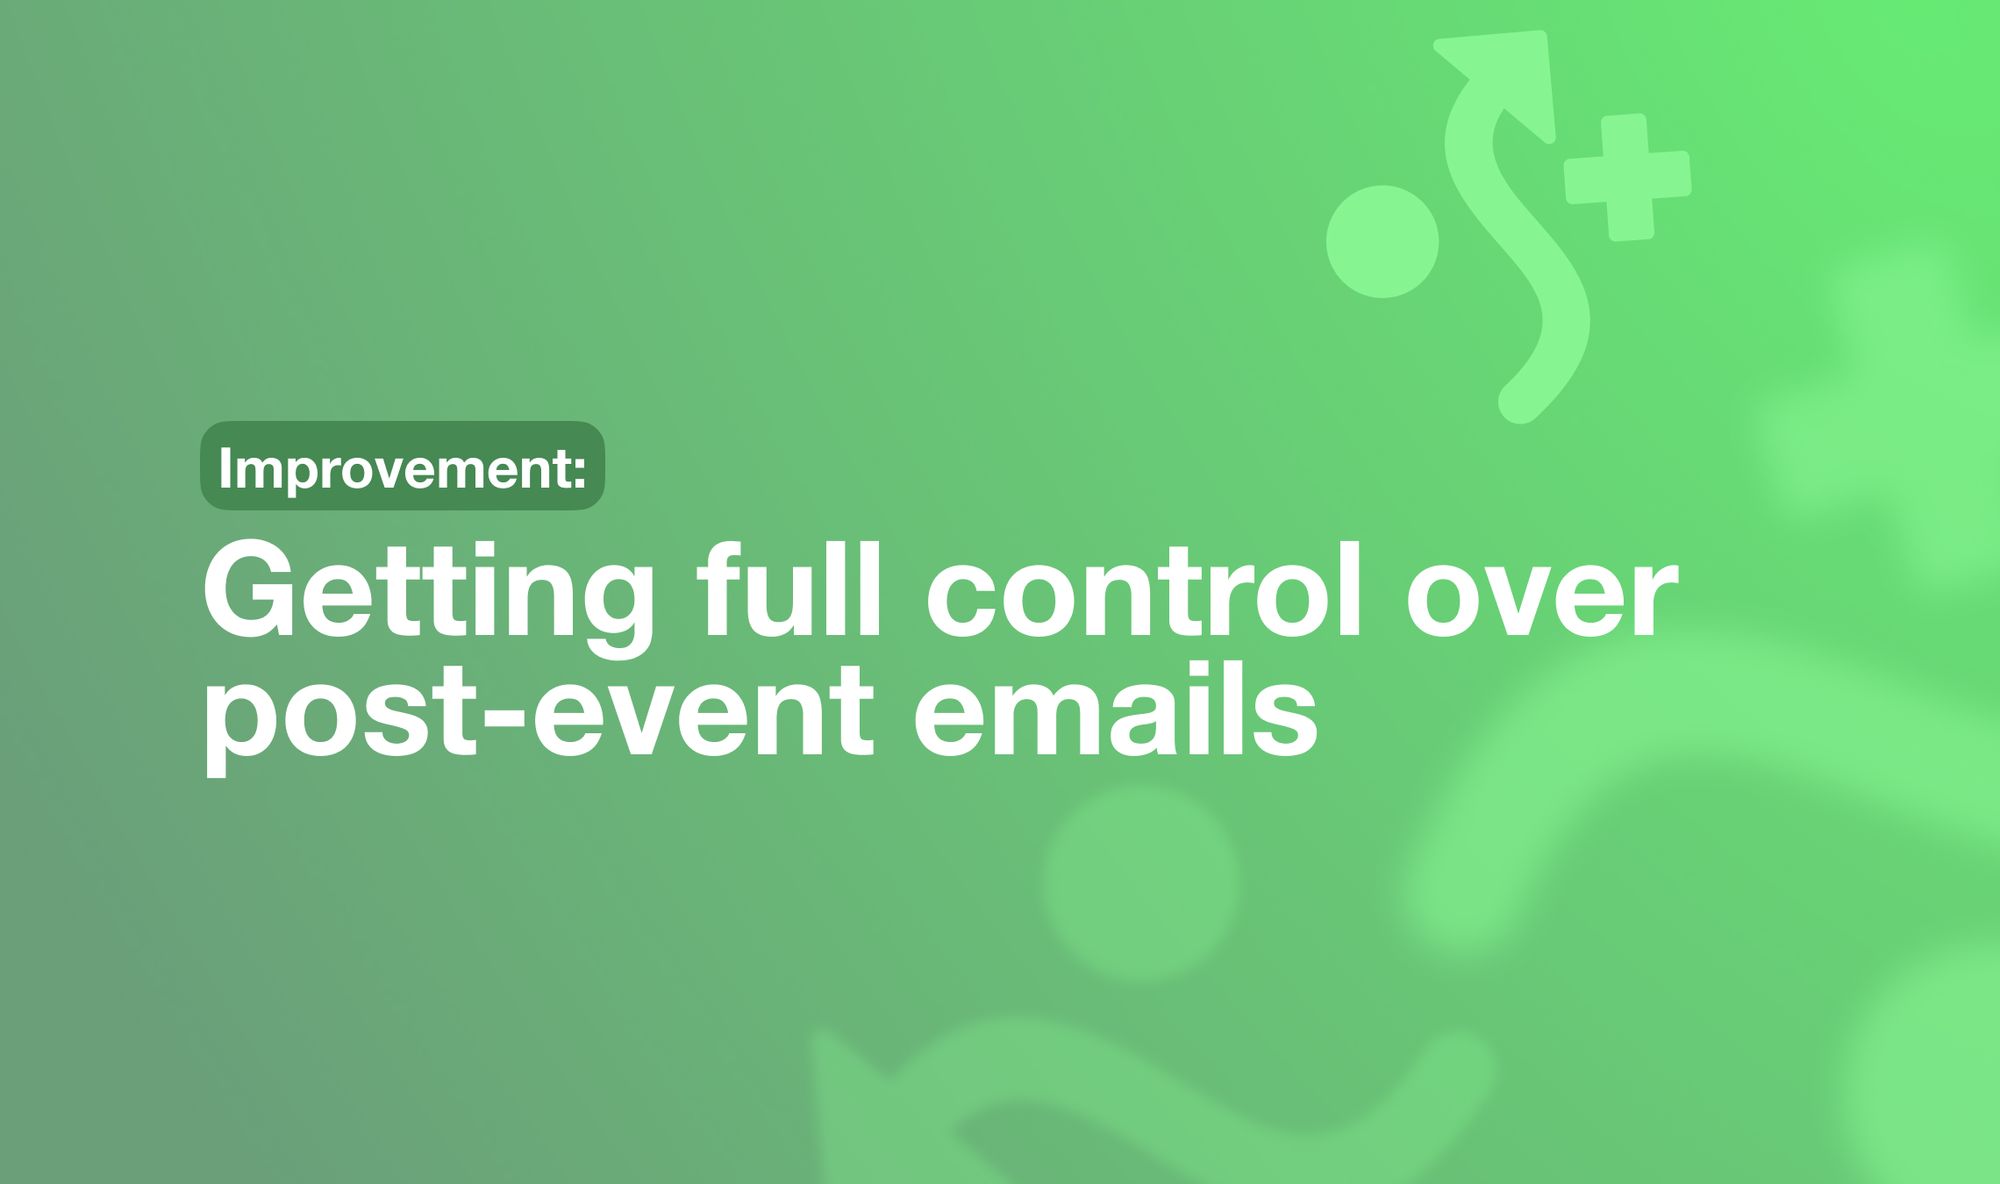 Getting full control over post-event emails